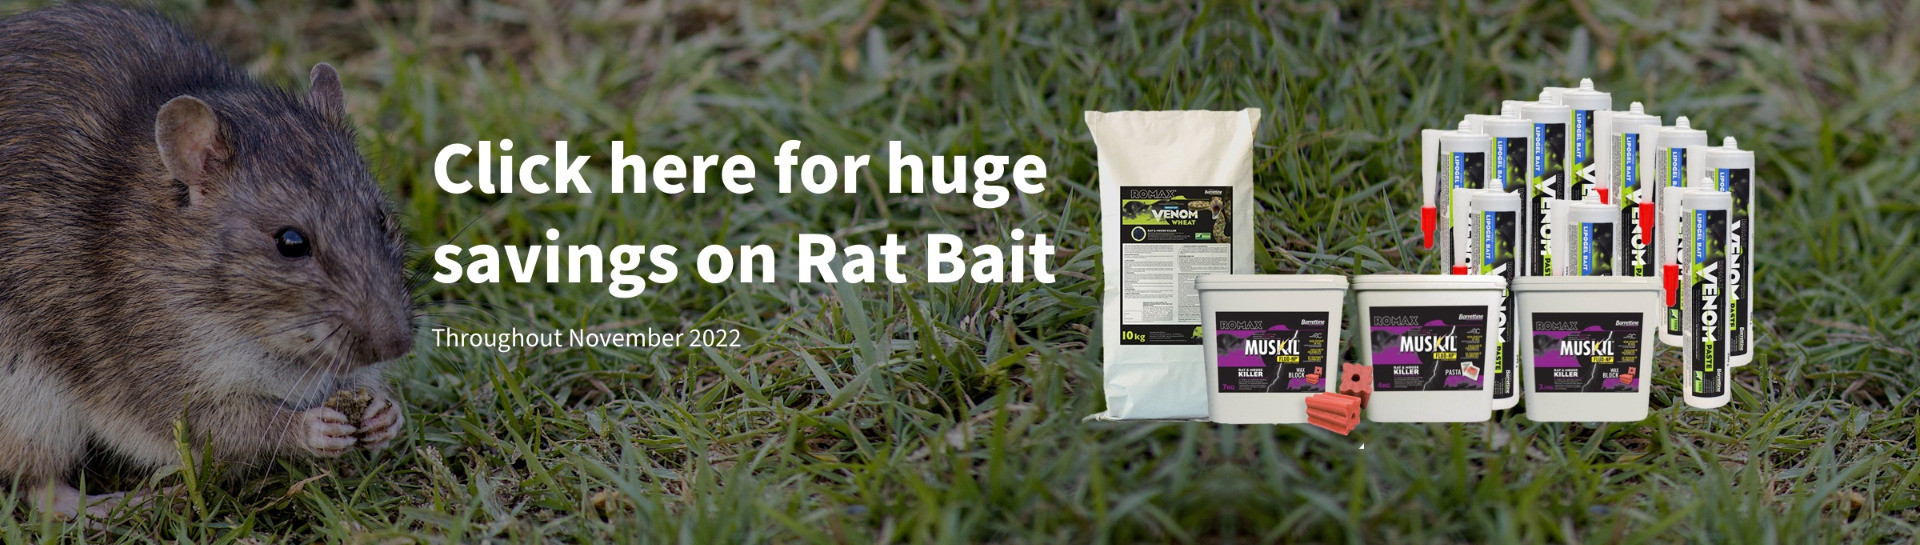 Click here for huge savings on Rat Bait. Throughout November 2022.